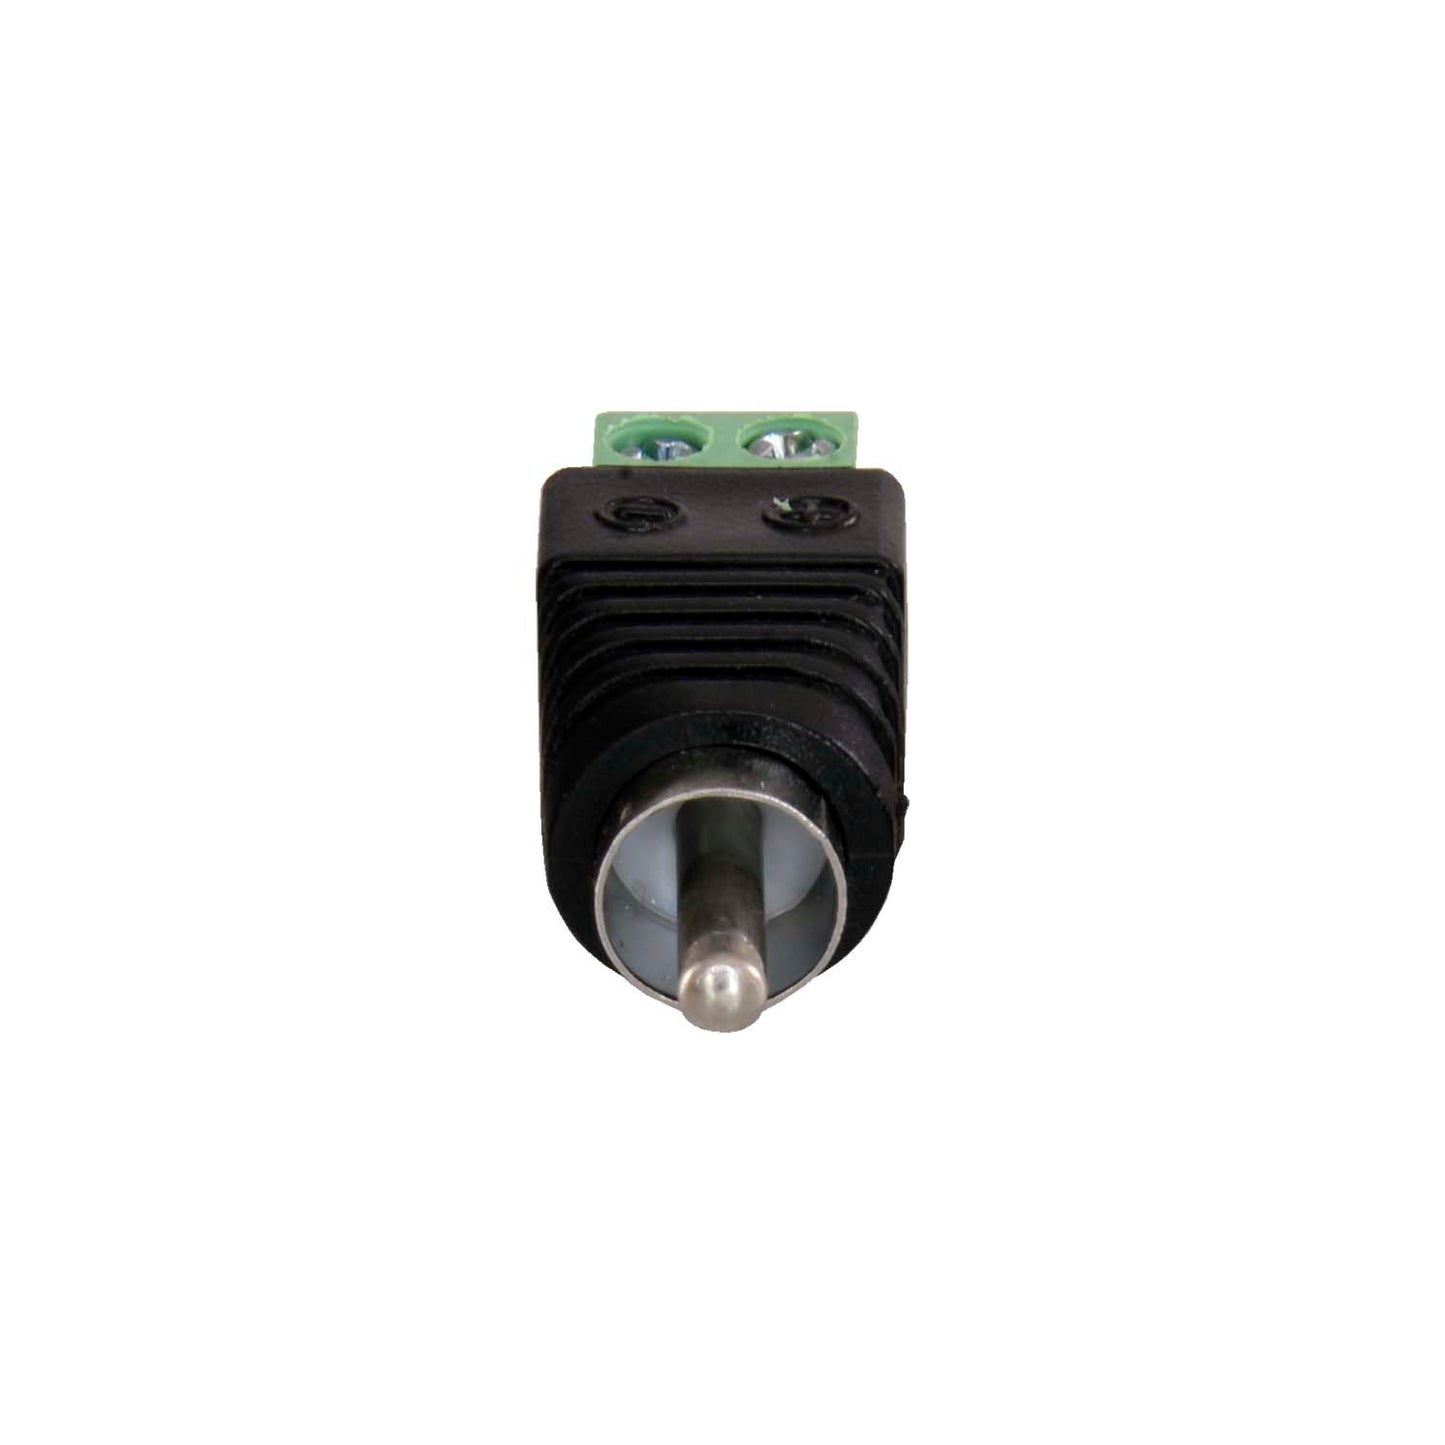 SAFIRE connector - RCA male - Output +/ from 2 terminals - 36 mm (Fo) - 13 mm (An) - 5 g